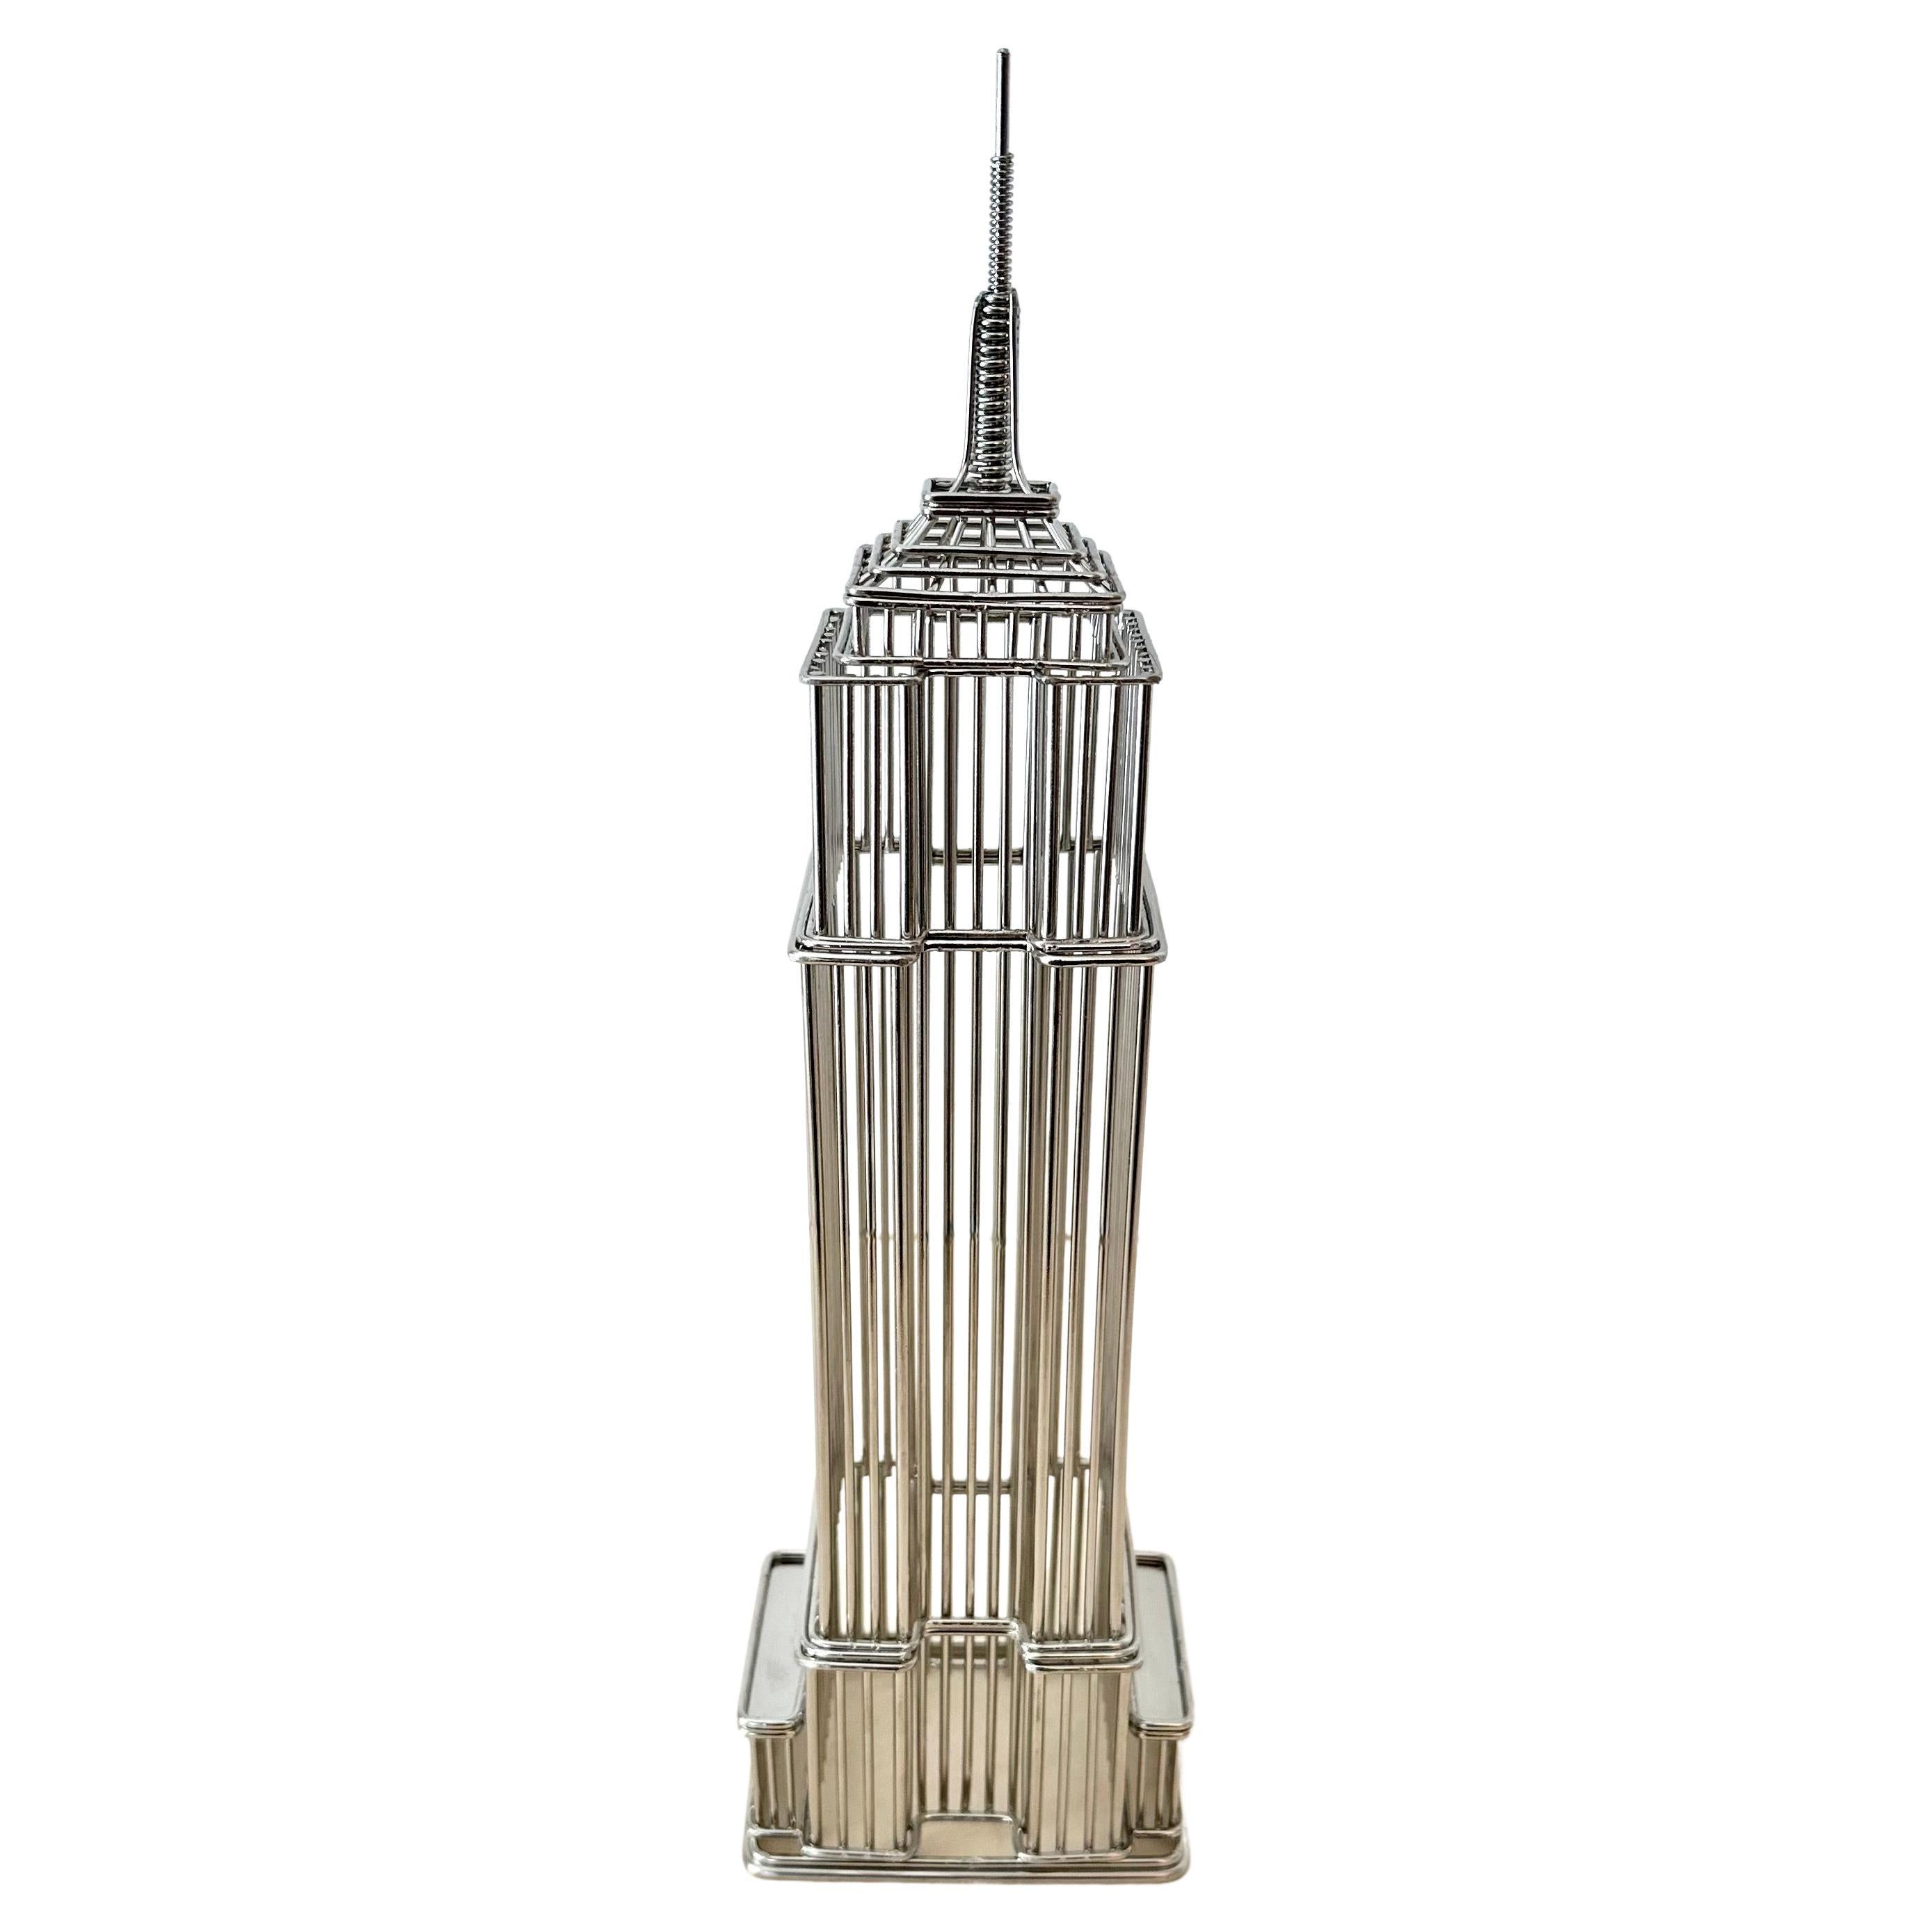 Wire Sculpture of the Empire State Building